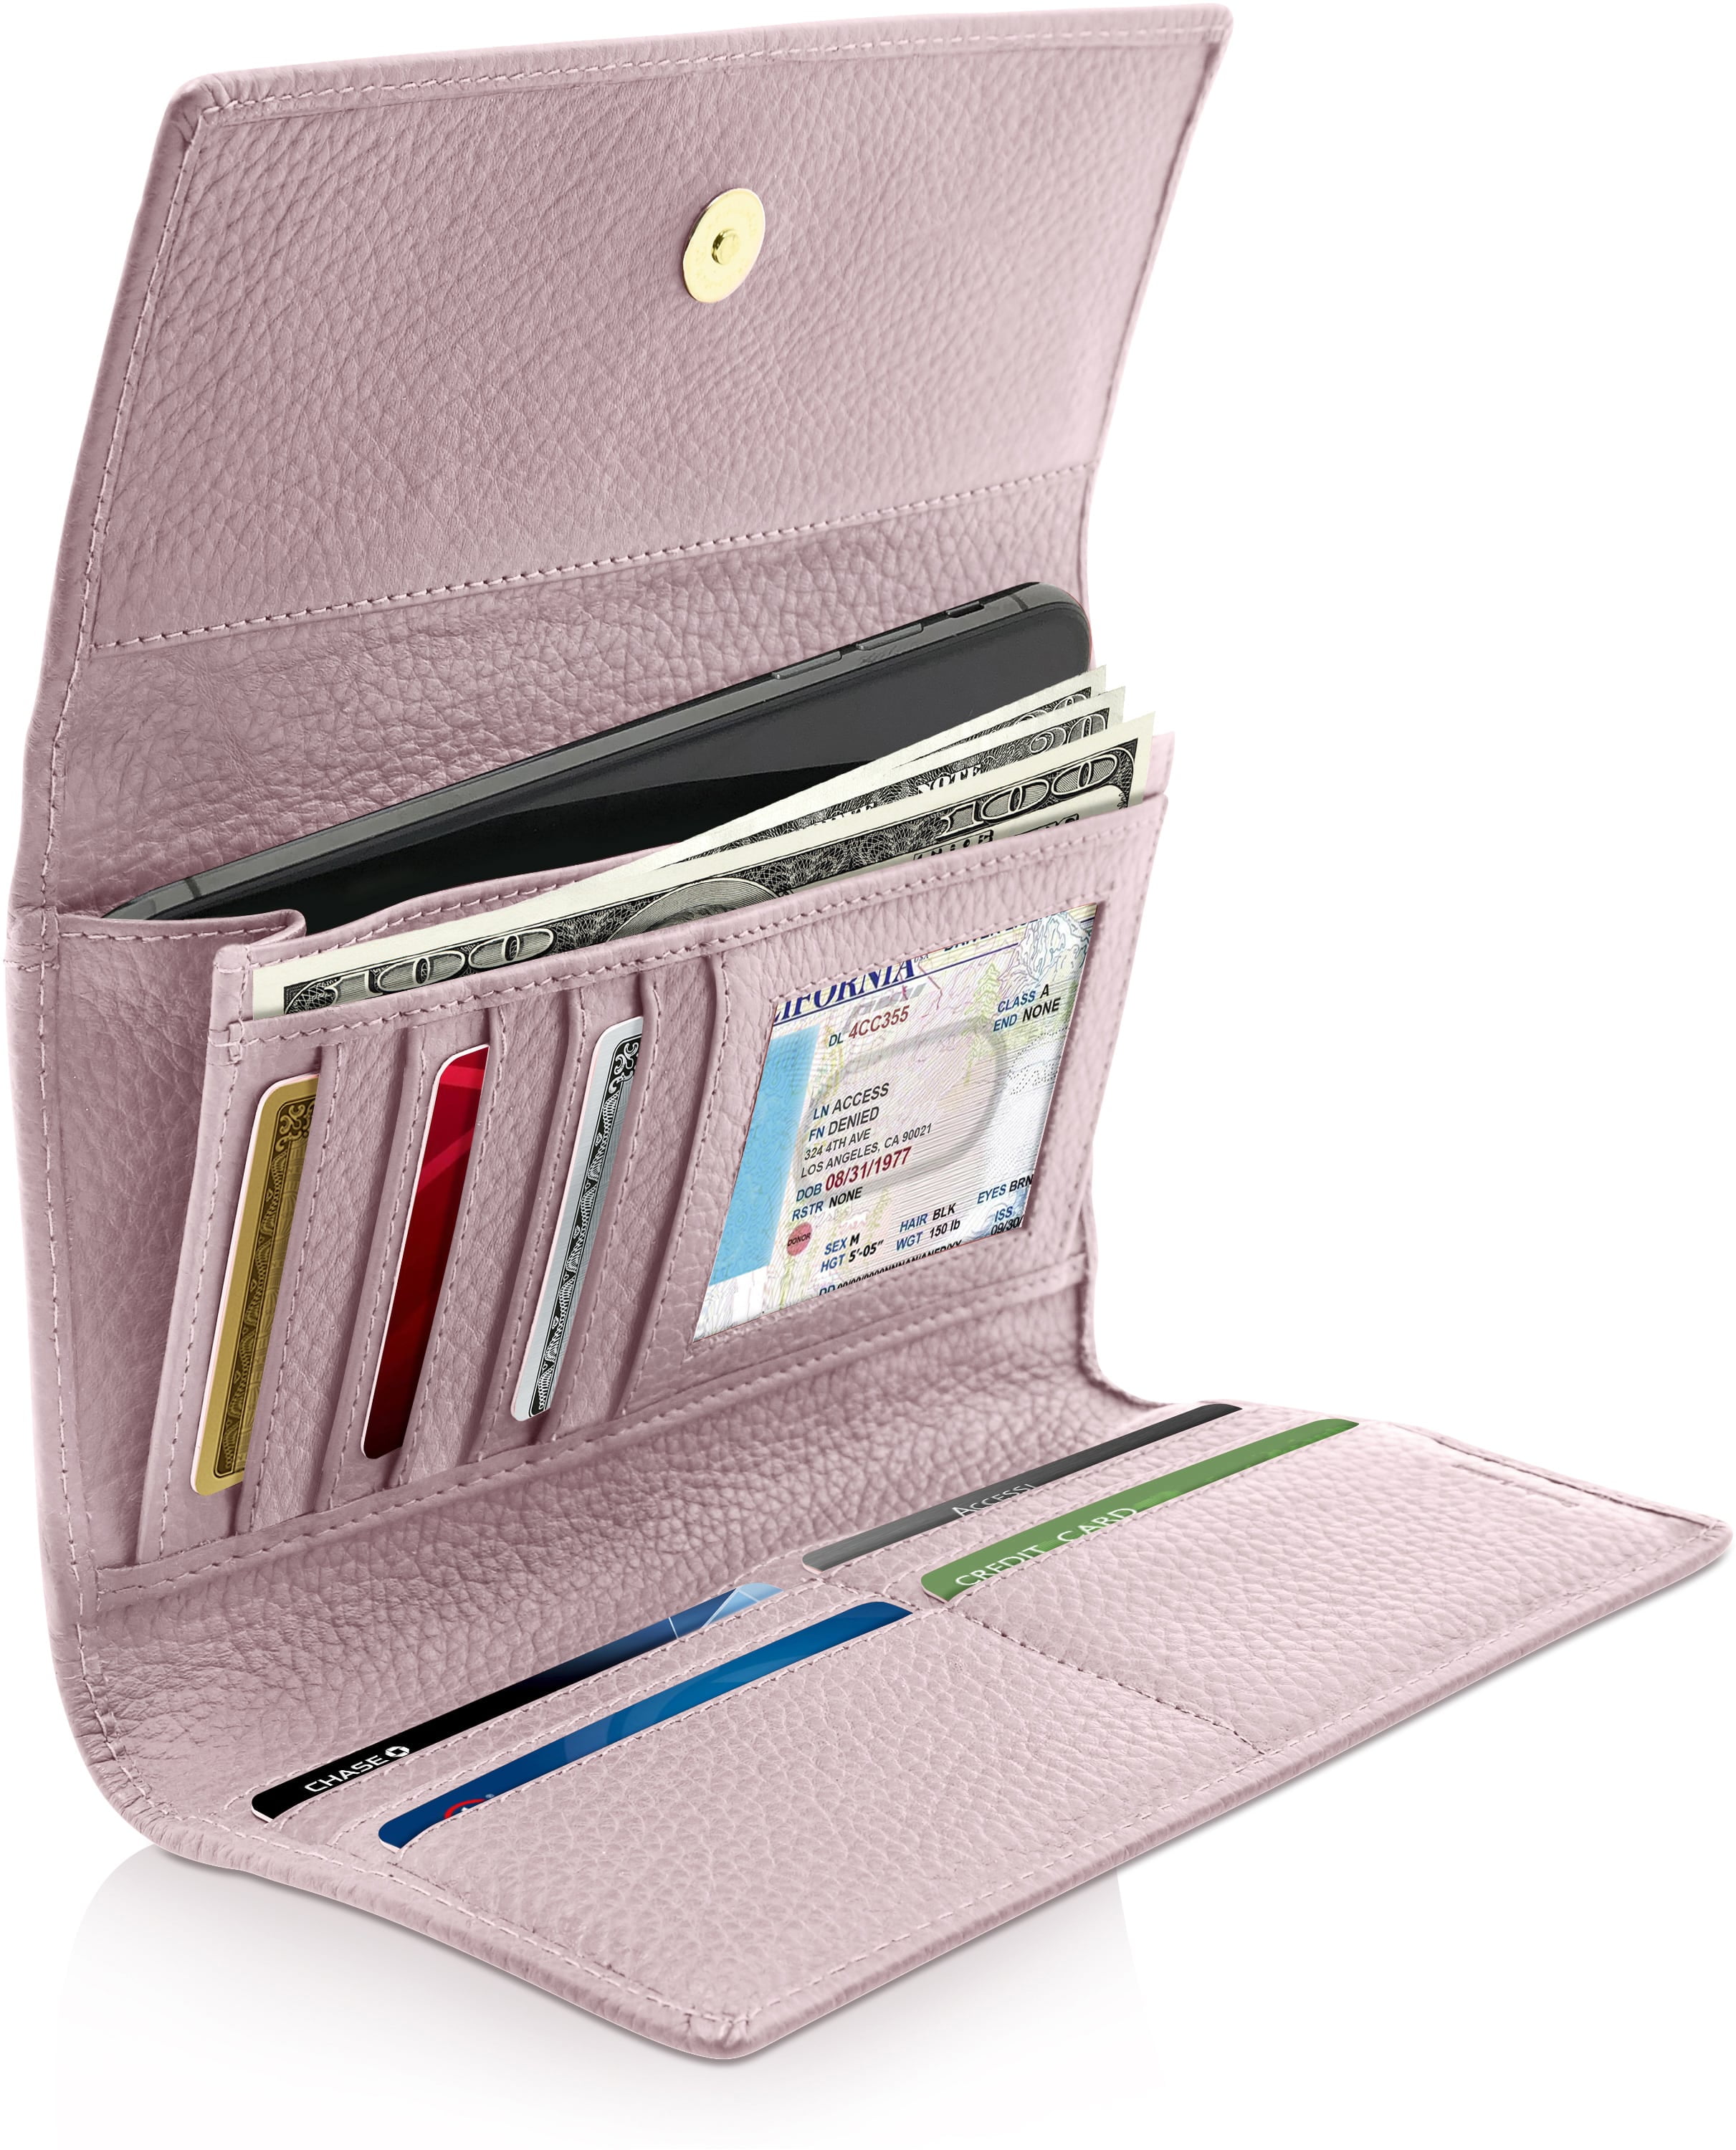 Trifold Clutch RFID Wallets For Women - Large Womens Wallet With Coin Pouch  Leather Organizer With Removable Checkbook Cover Gifts For Women -  Walmart.com - Walmart.com